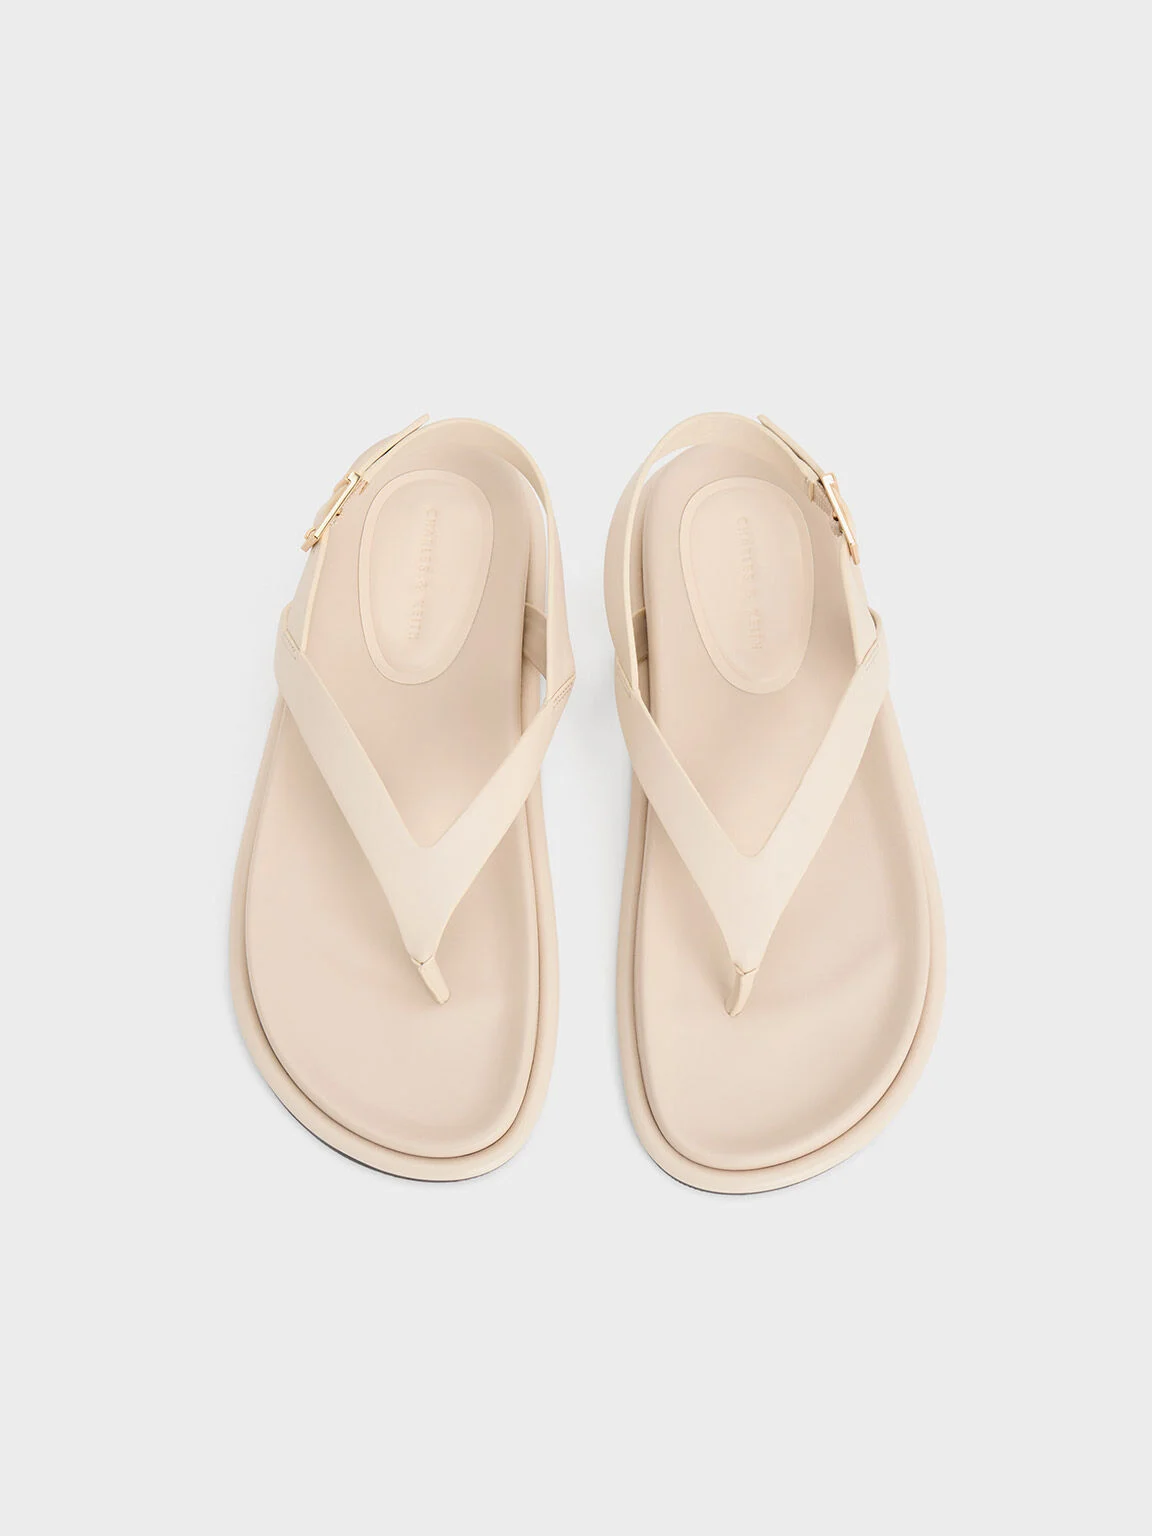 Women’s v-strap thong sandals in cream - CHARLES & KEITH